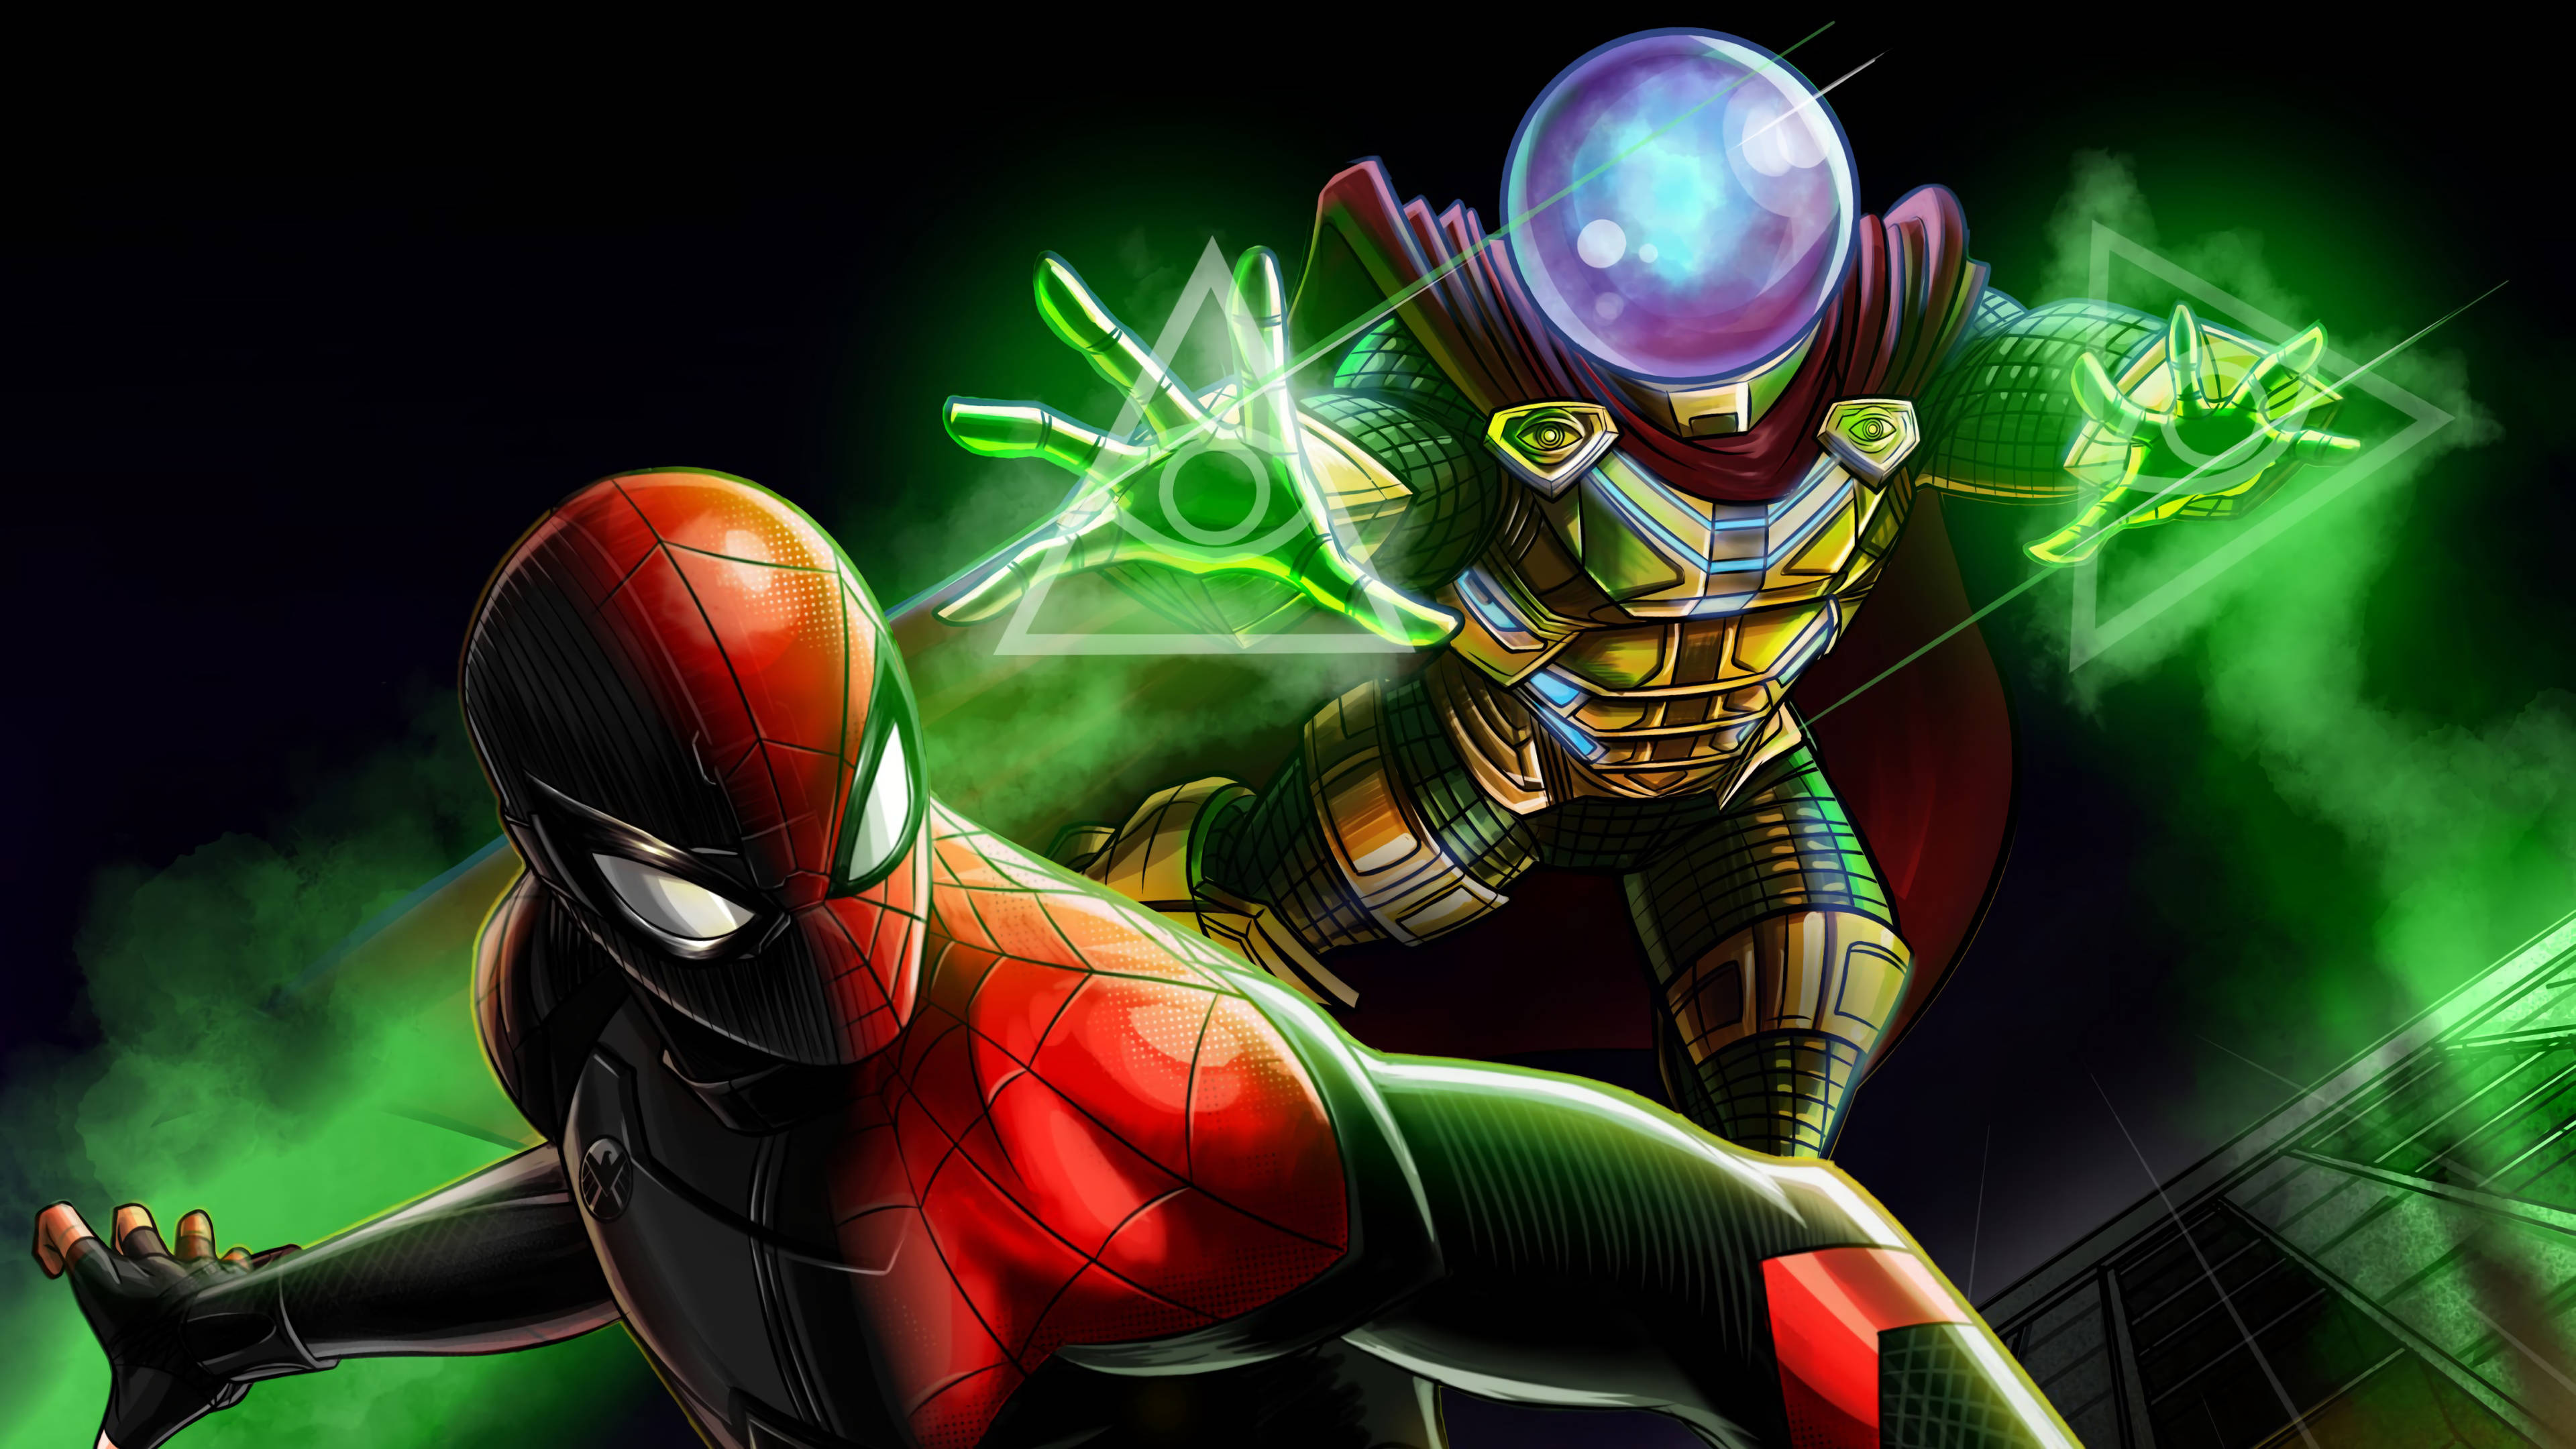 Download 3d Mysterio And Spider-man Wallpaper 